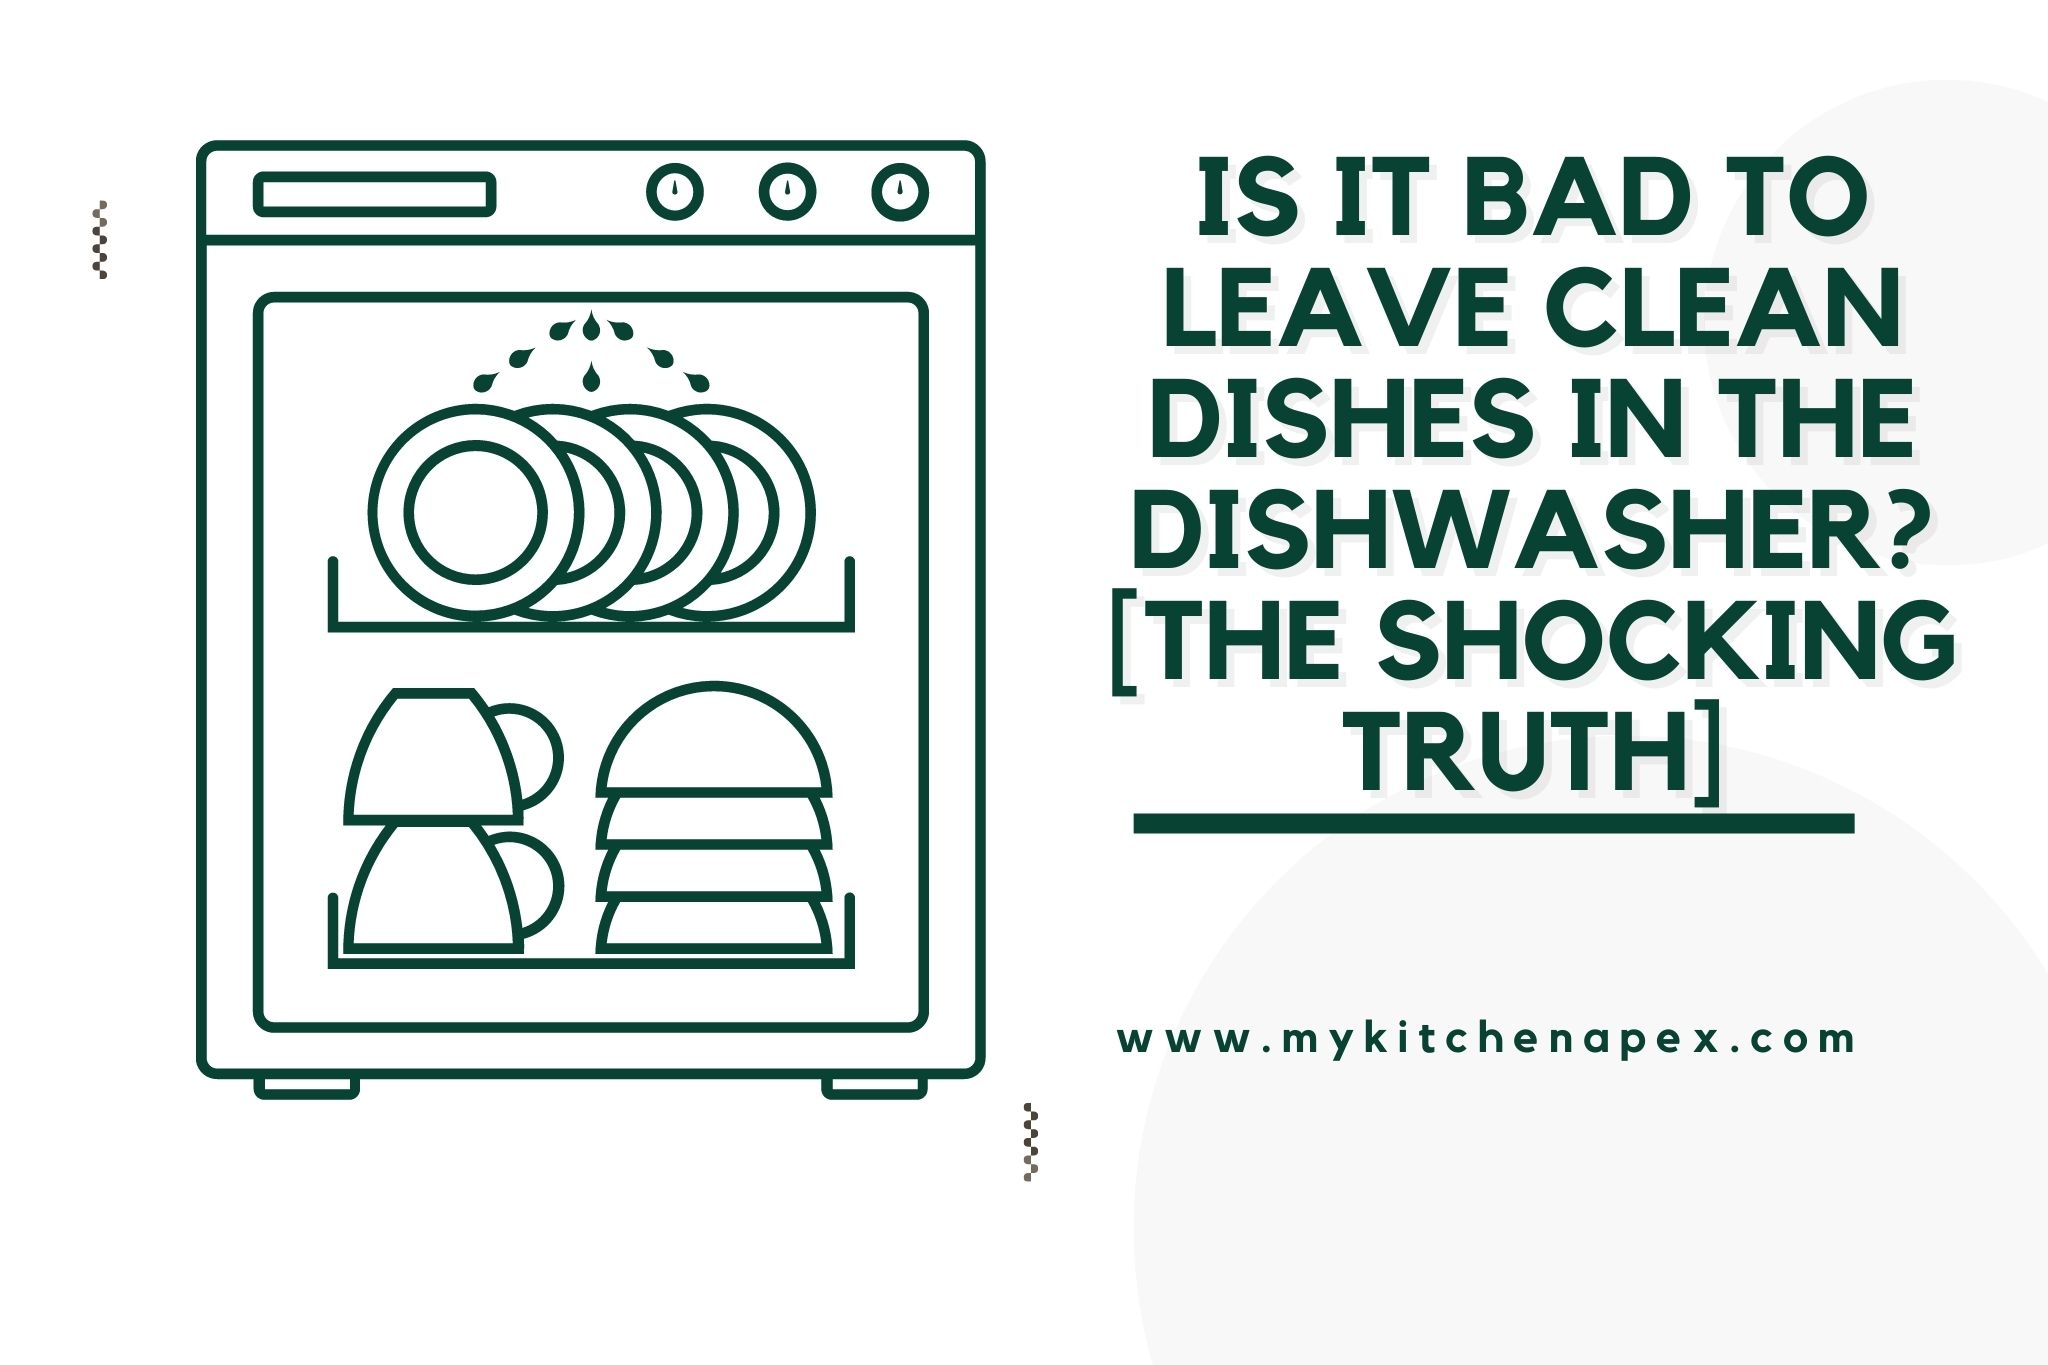 Is It Bad To Leave Clean Dishes In The Dishwasher? [The SHOCKING Truth]